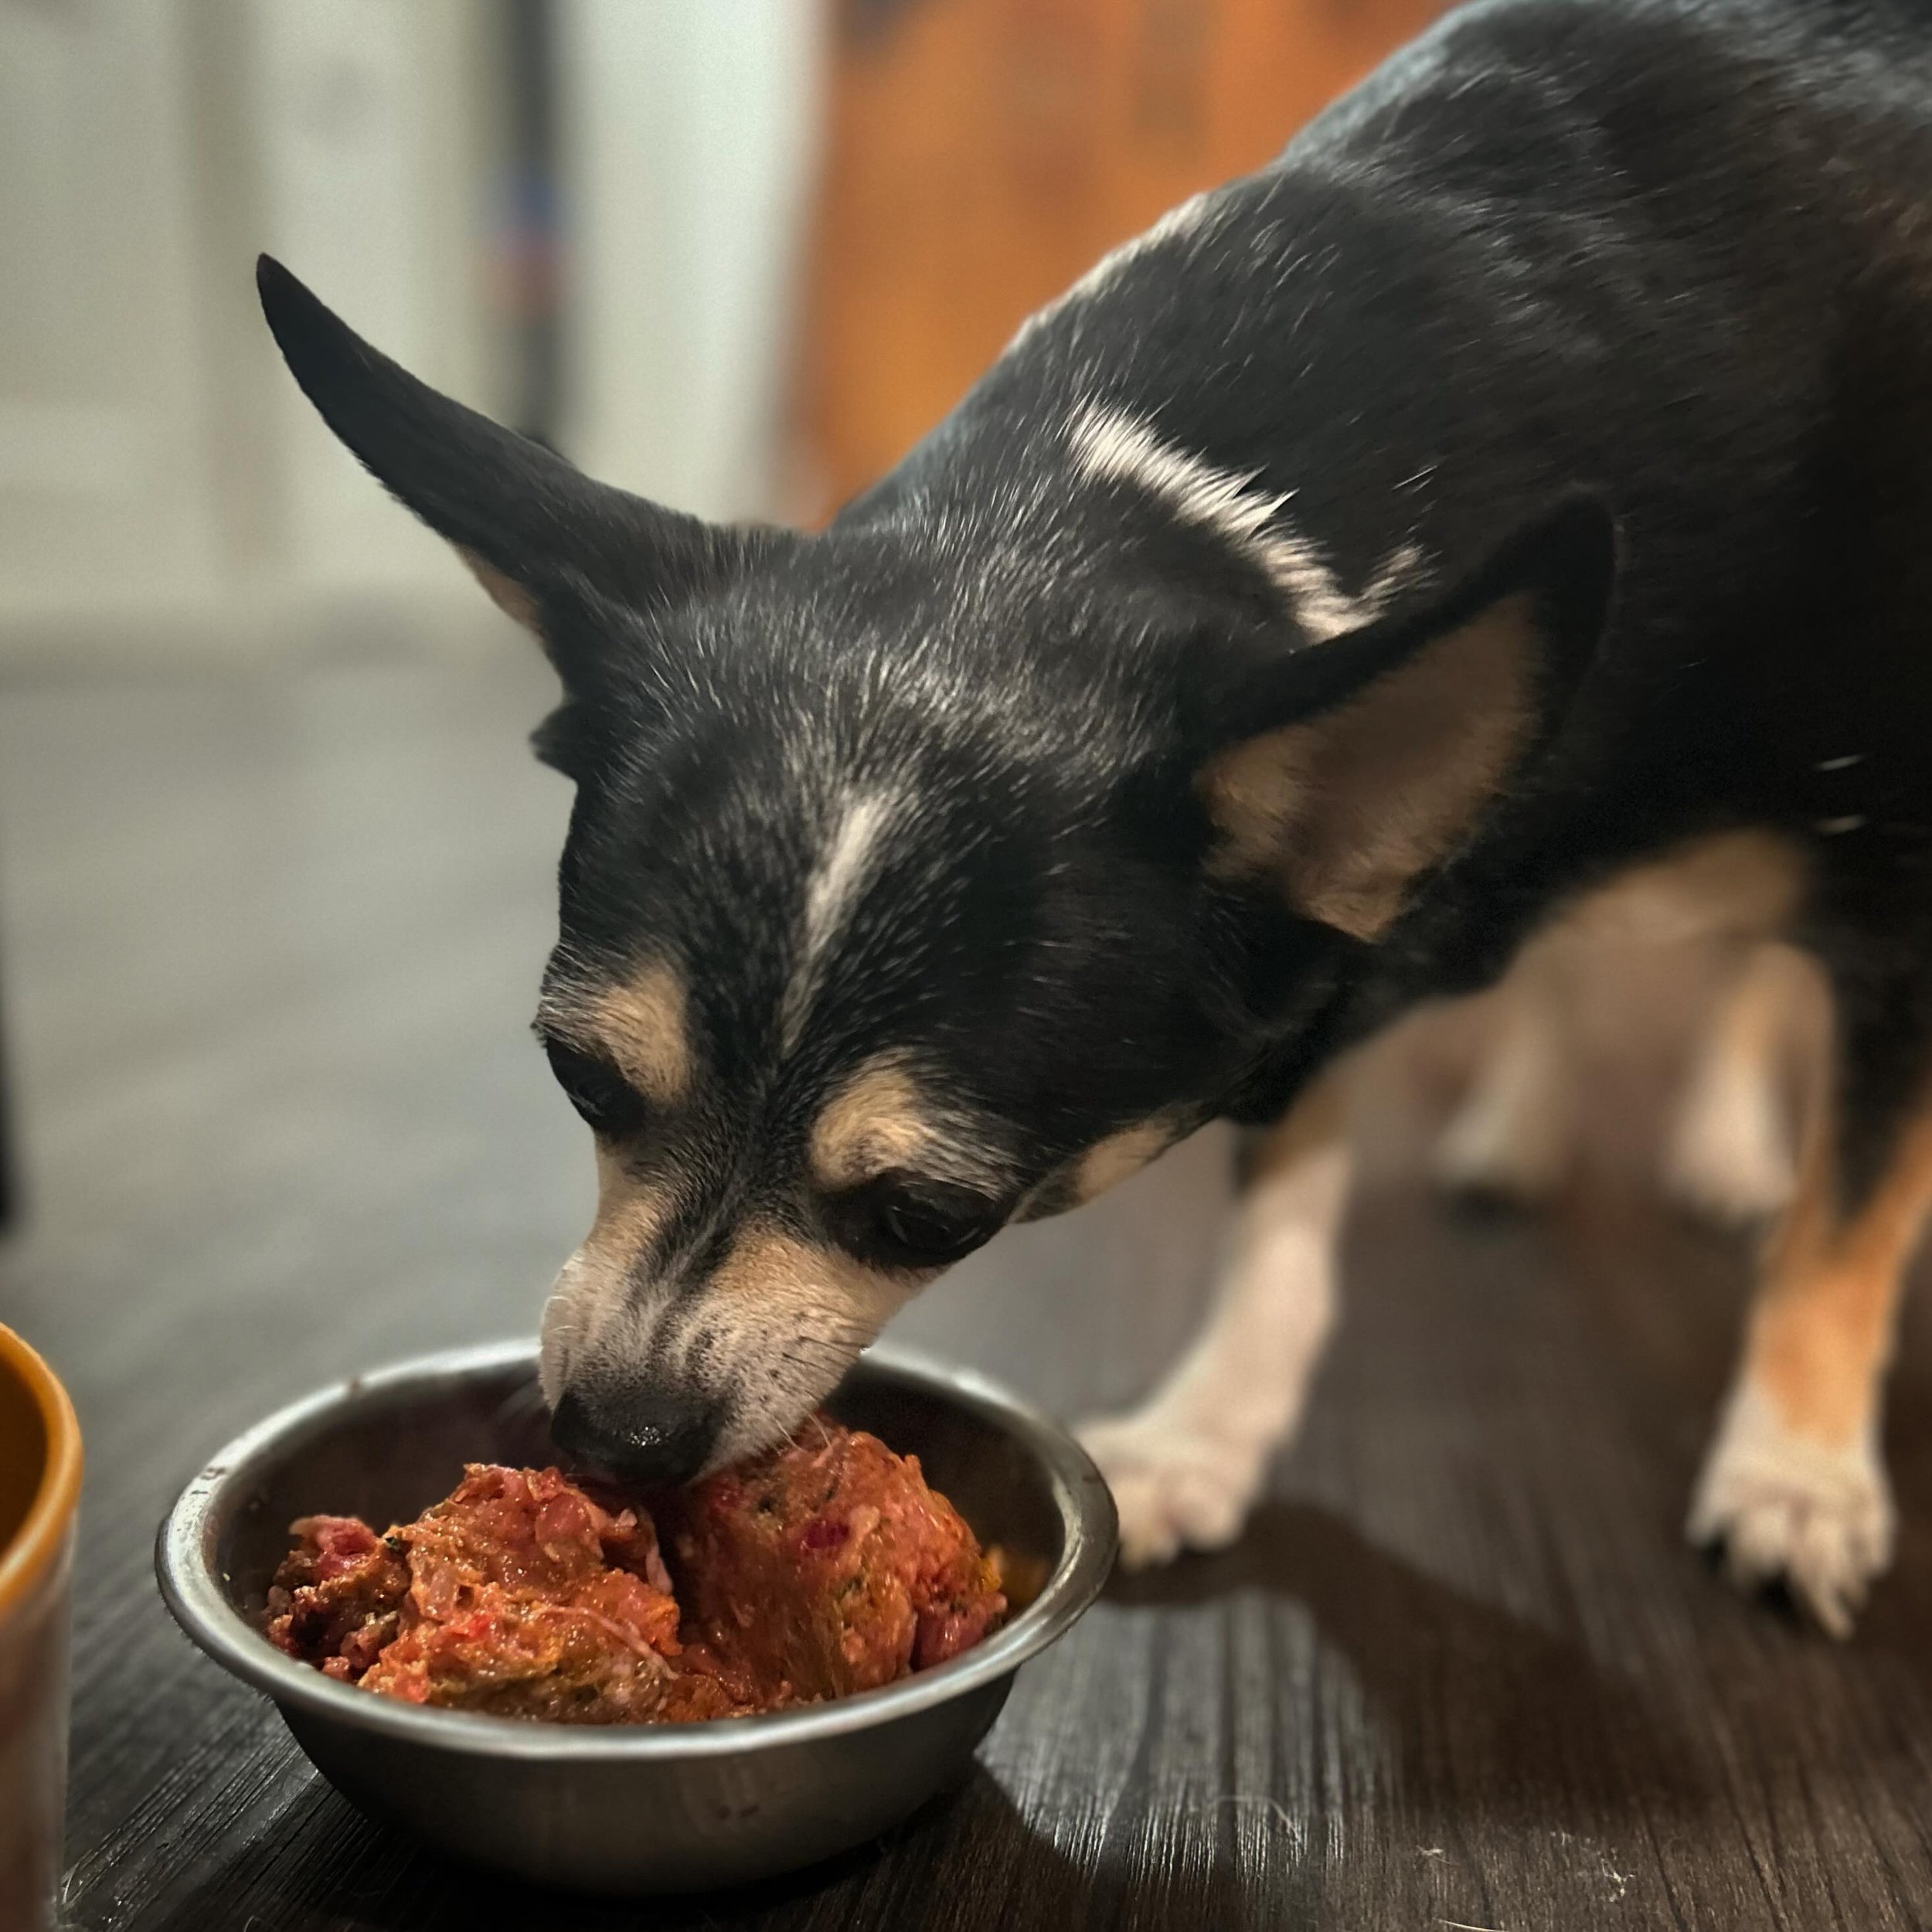 Diego enjoying his dinner !🐾🍽️ #raw #rawdogfood #rawdogfooddiet #rawfood 

We are very excited to be testing out samples to ensure that your pups will love our food. Sit tight 🤭